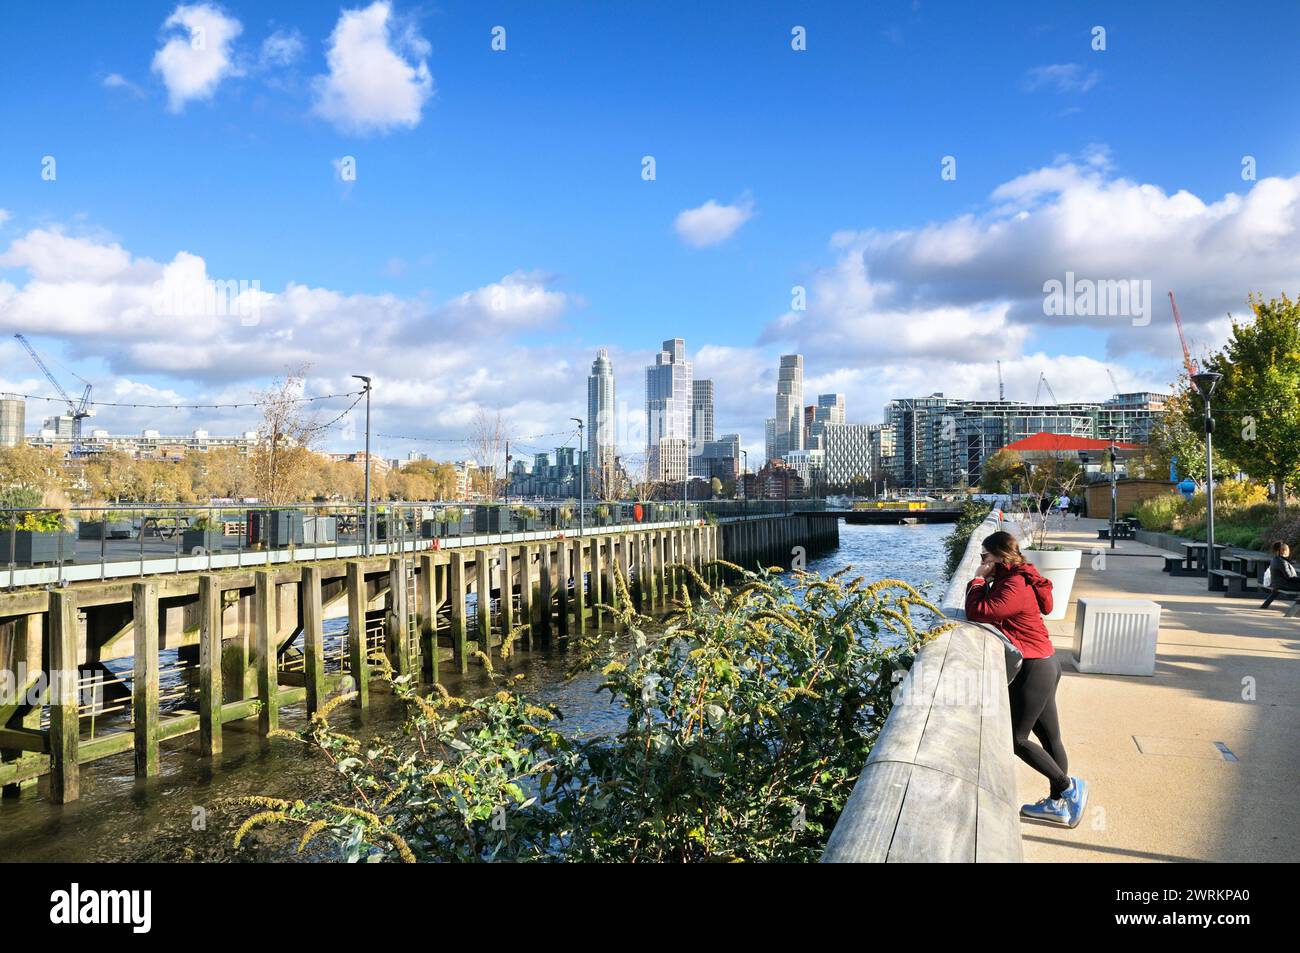 View of the River Thames outside Battersea Power Station with Coaling Jetty and high rise residential skyscrapers of Nine Elms and Vauxhall, London UK Stock Photo